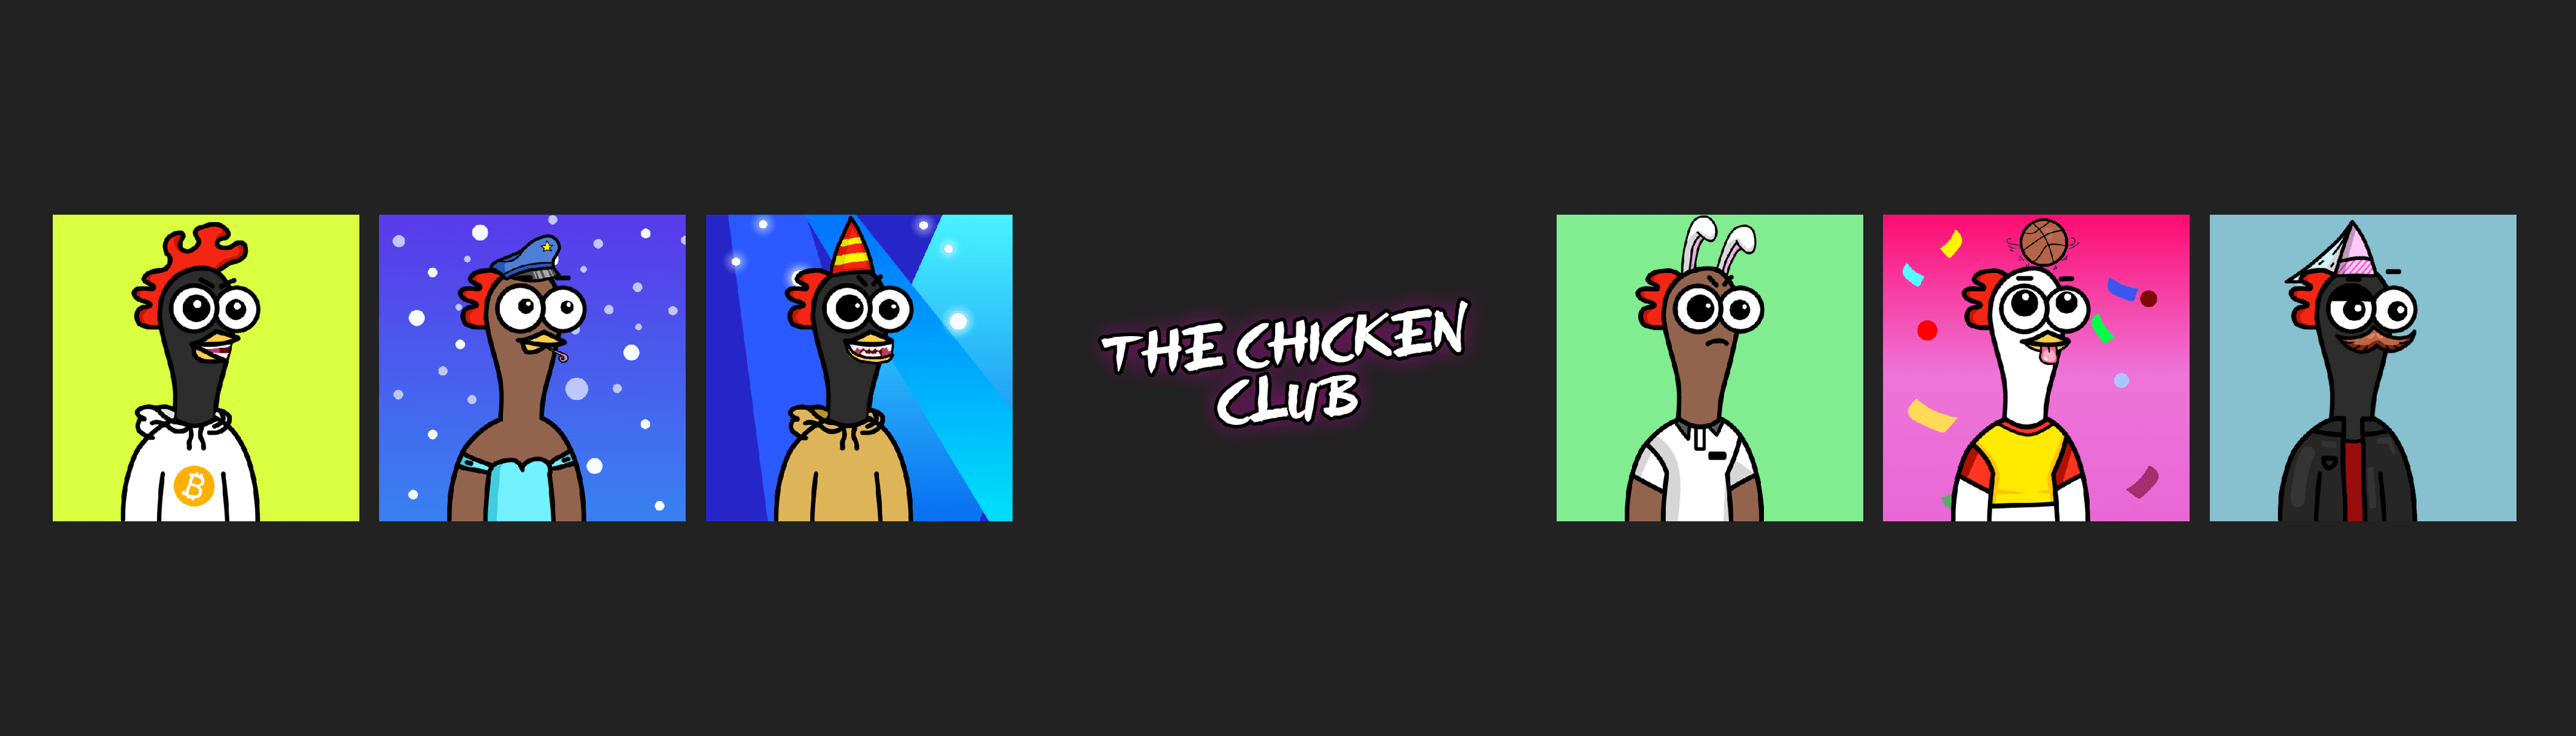 TheChickenClub bannière